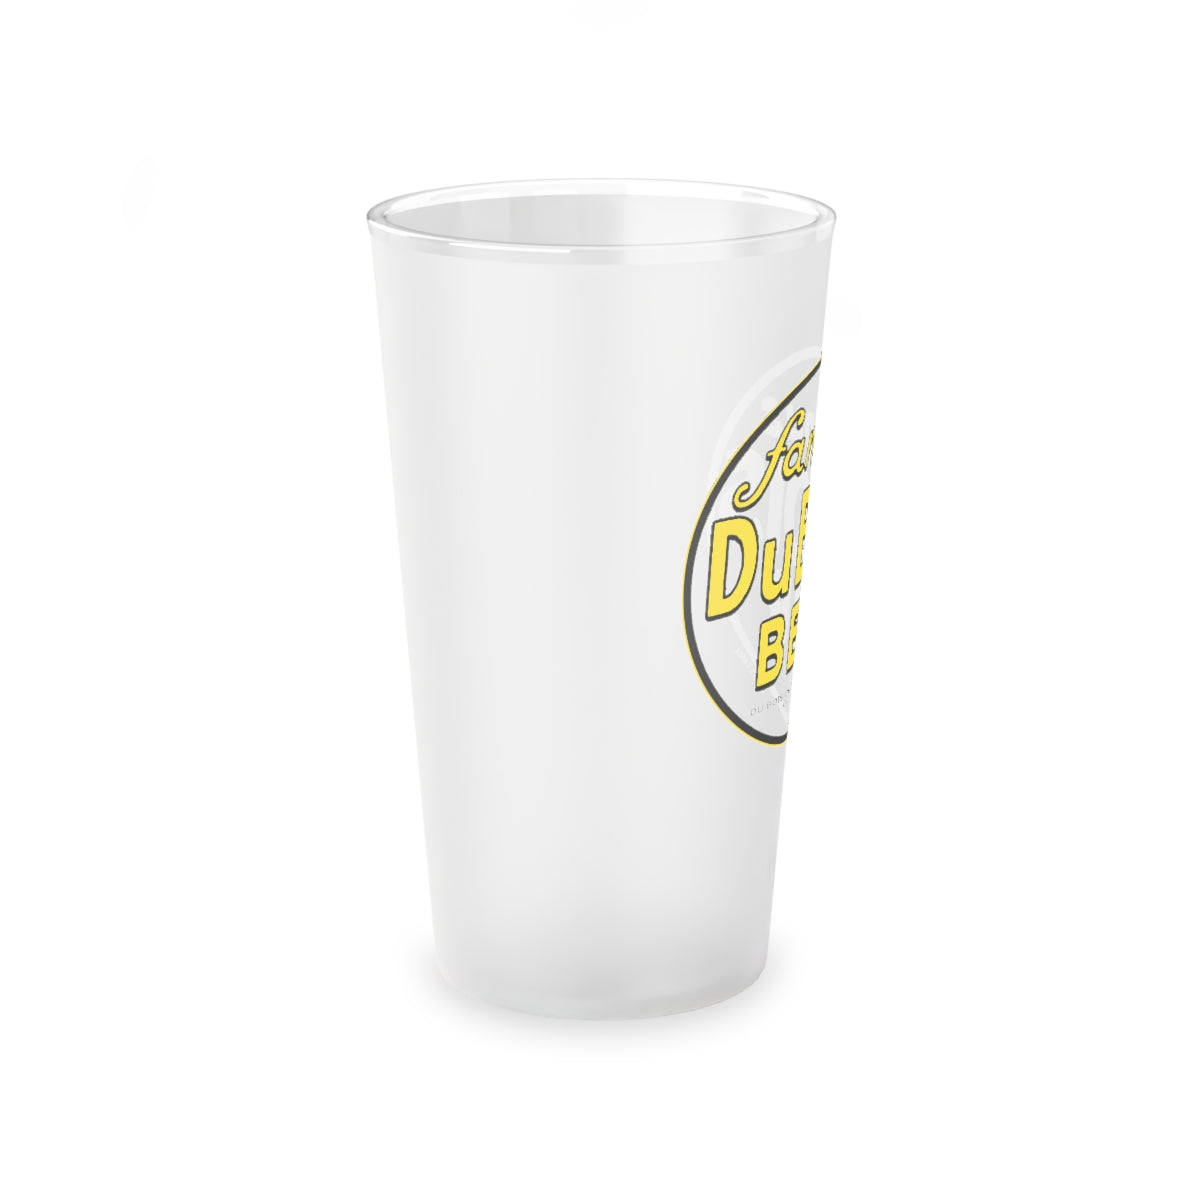 FAMOUS DuBOIS BEER - DuBOIS, PA - Frosted Pint Glass, 16oz - Yinzylvania